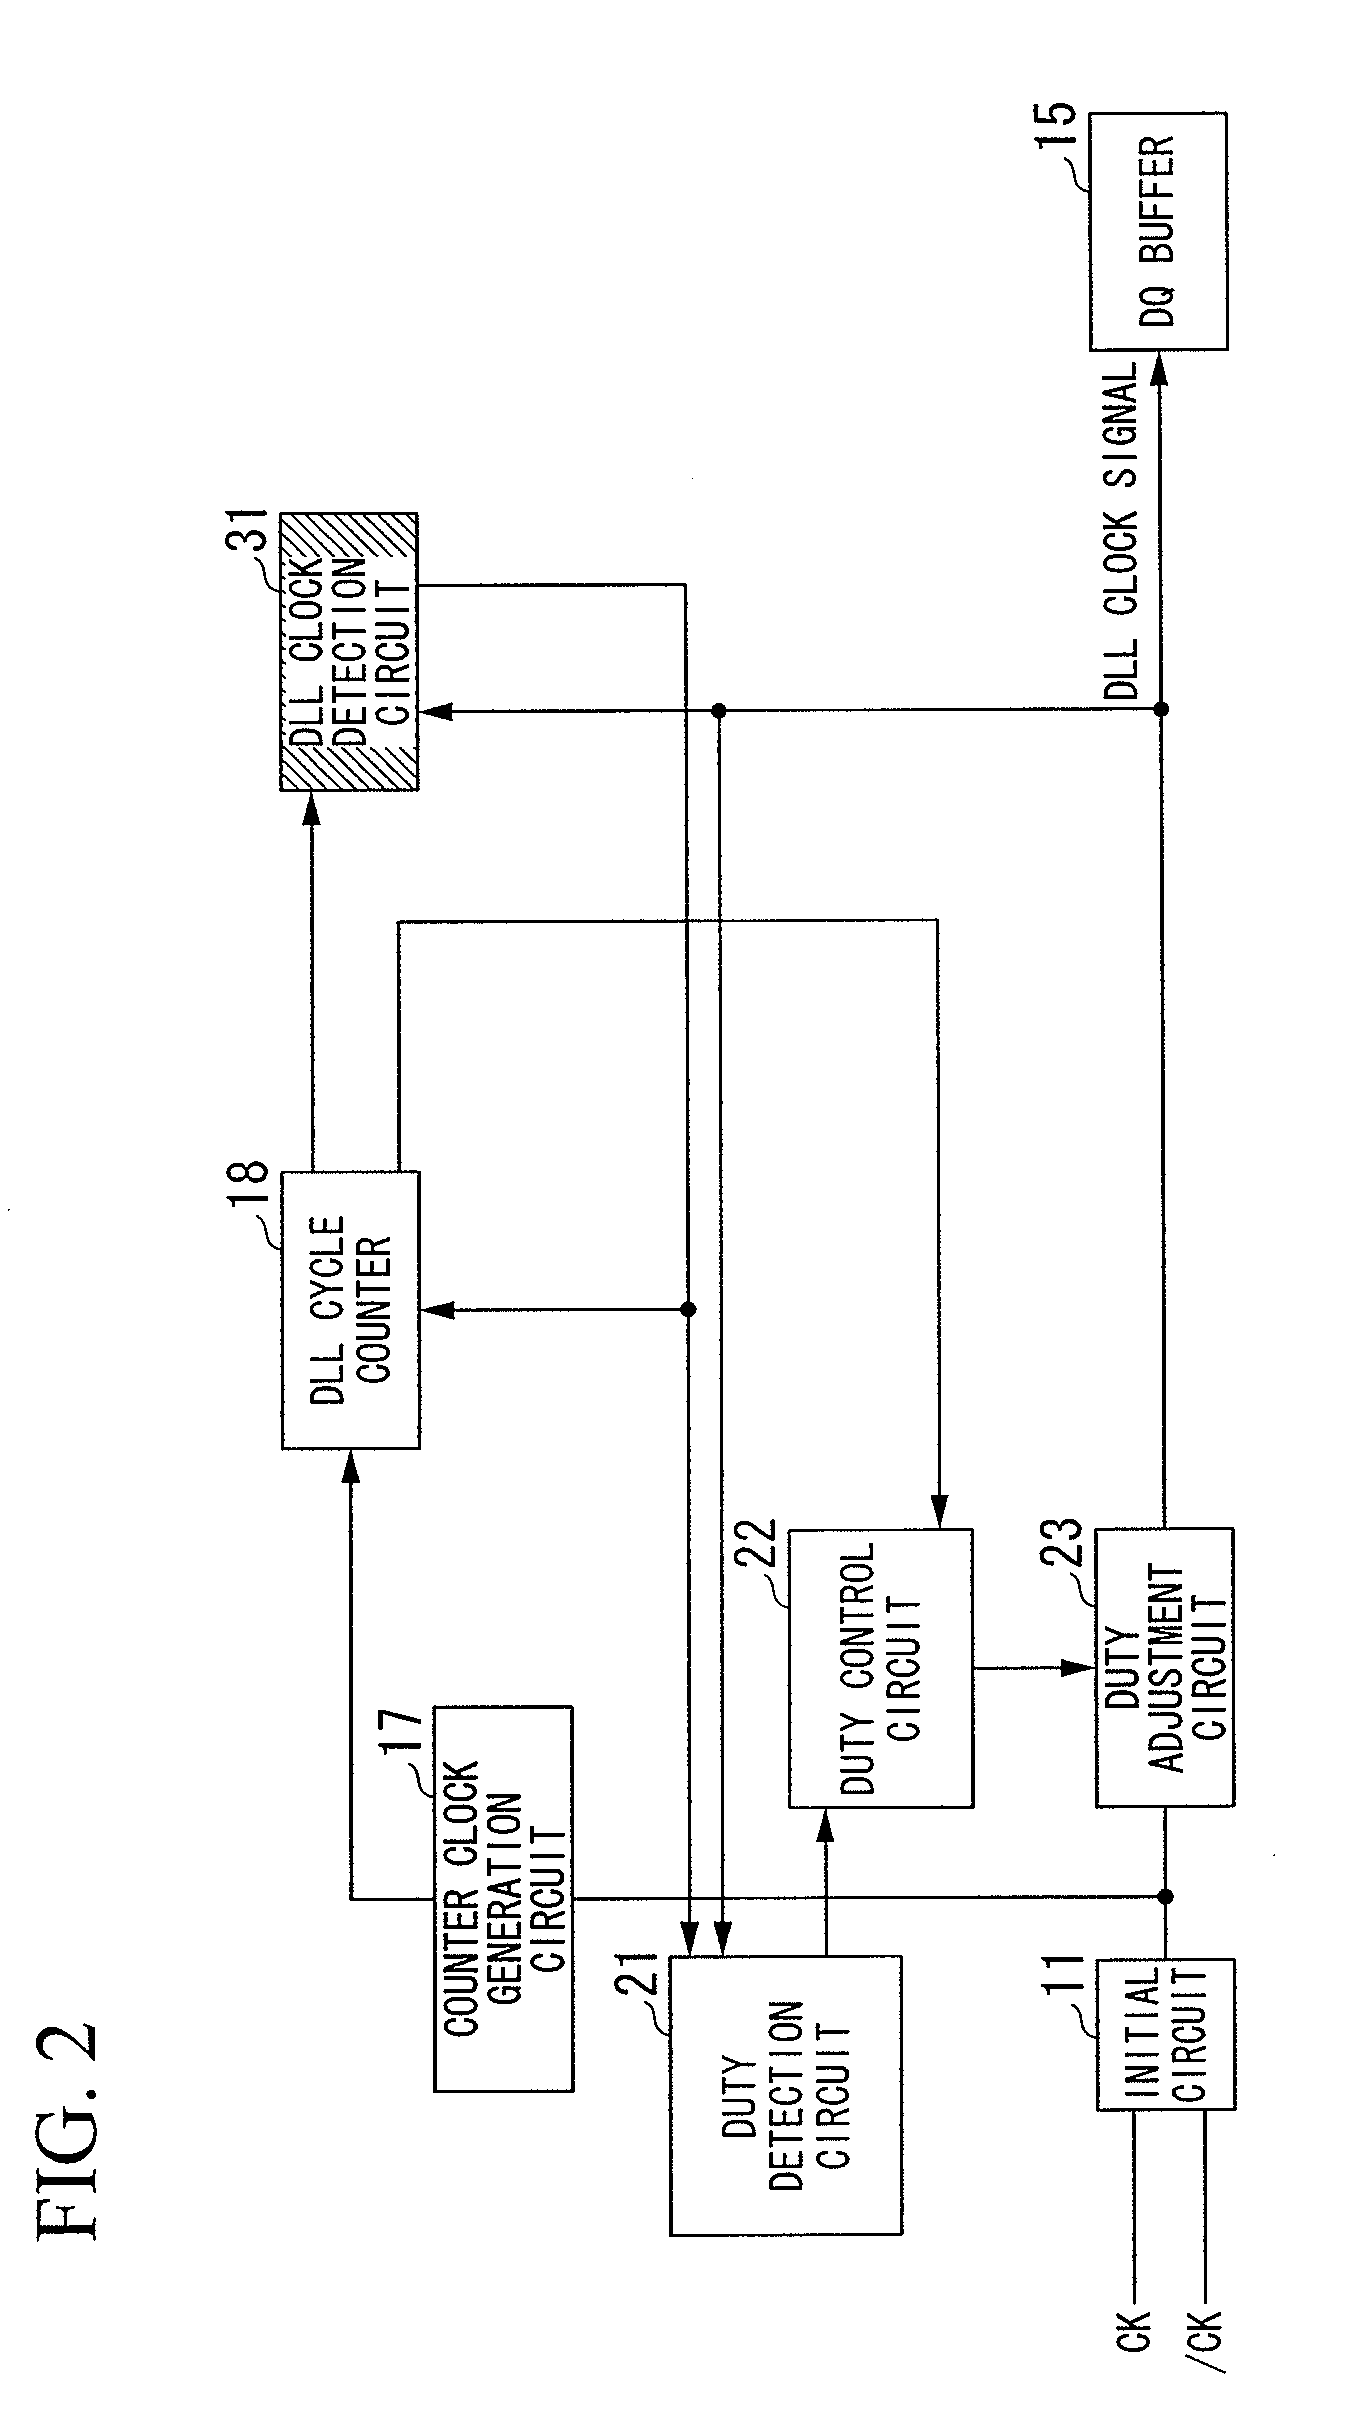 DLL circuit adapted to semiconductor device